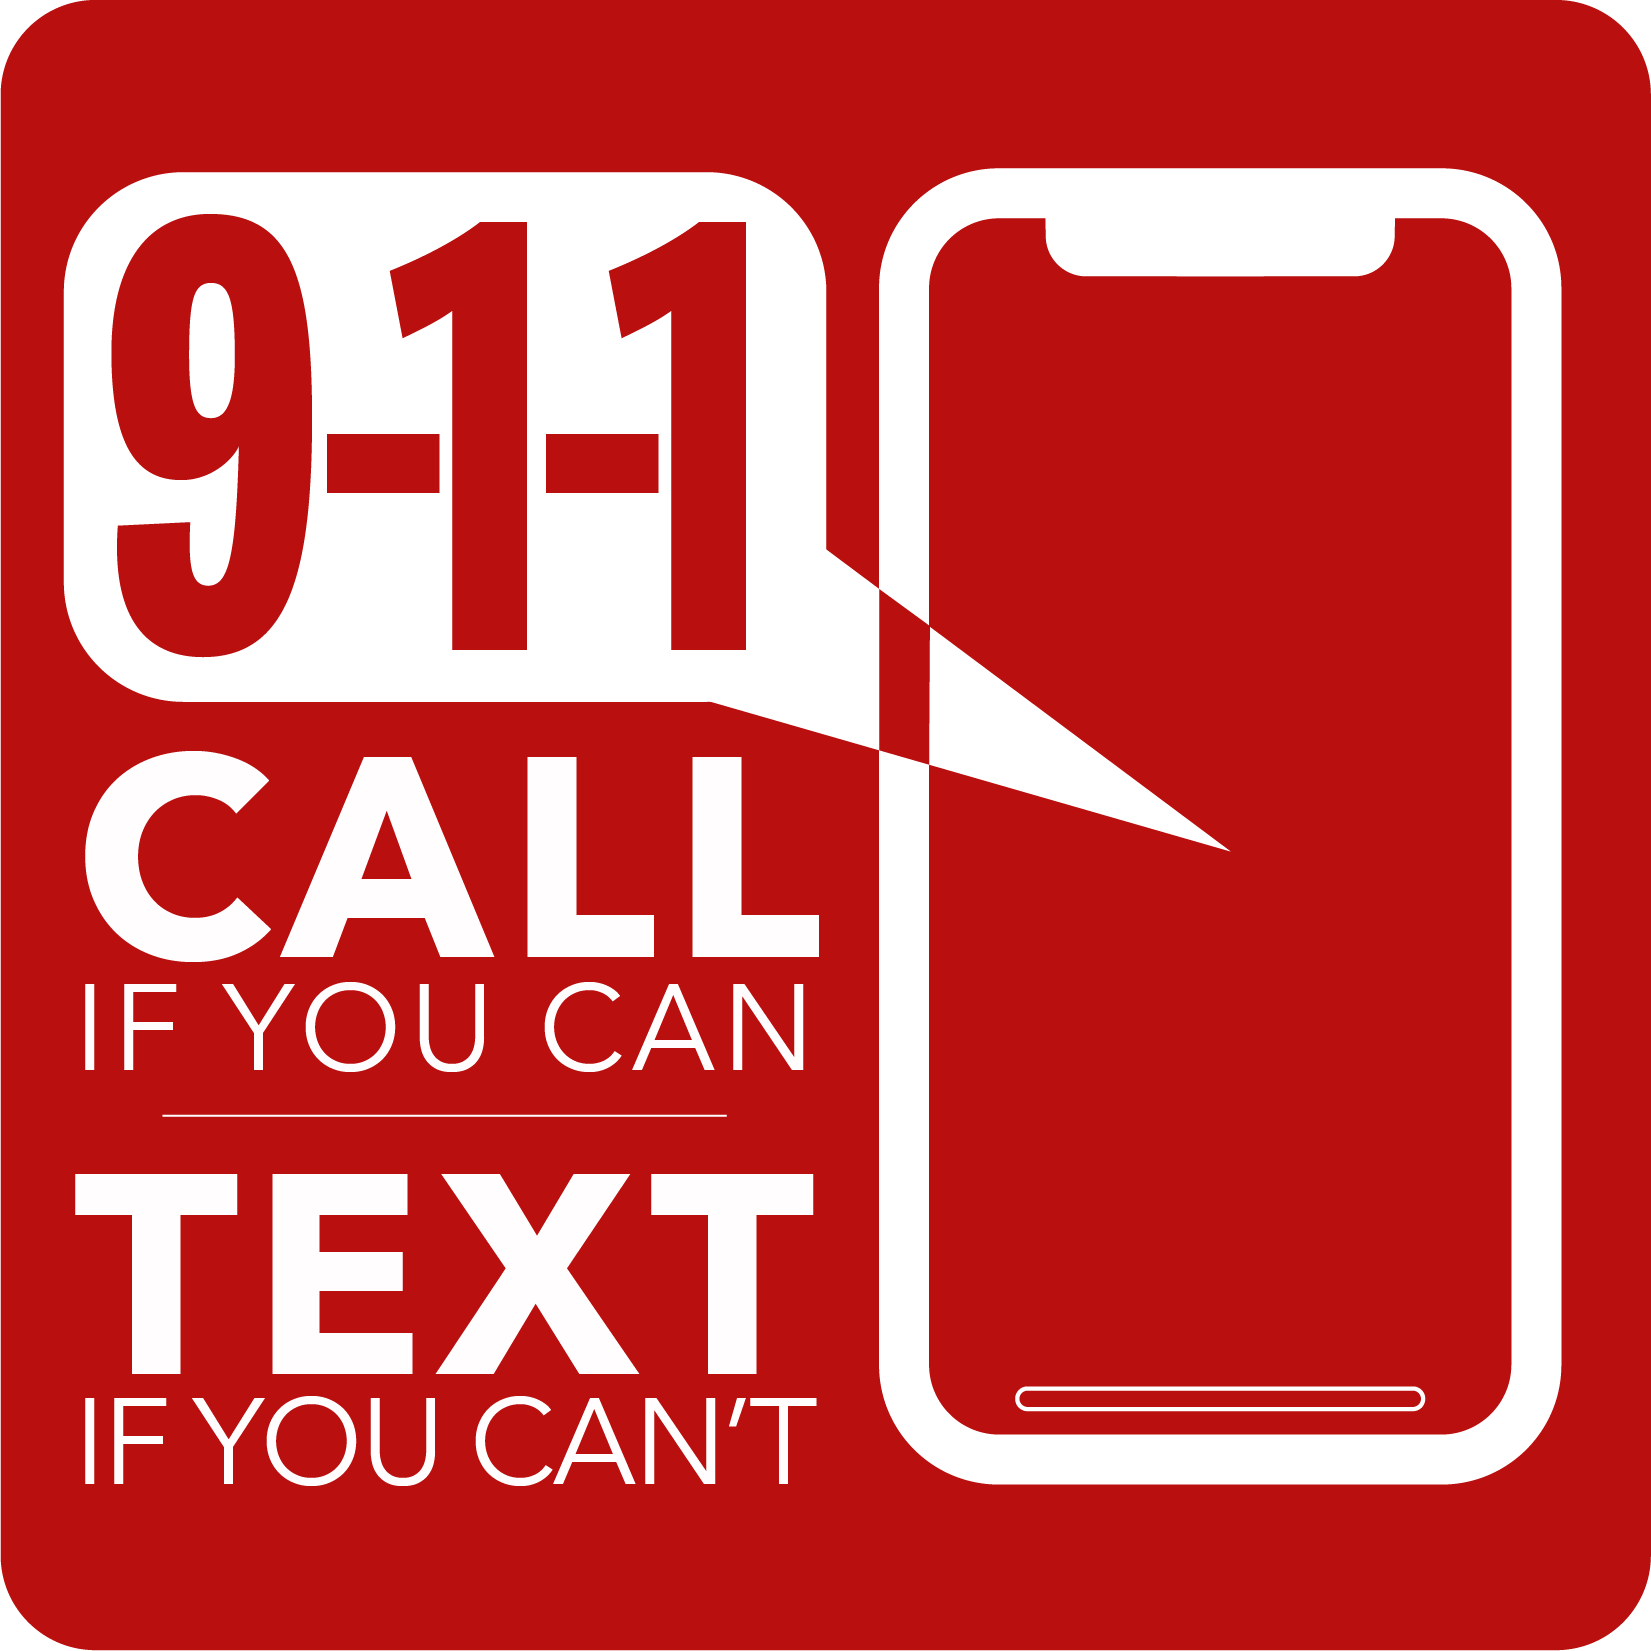 Text to 9-1-1